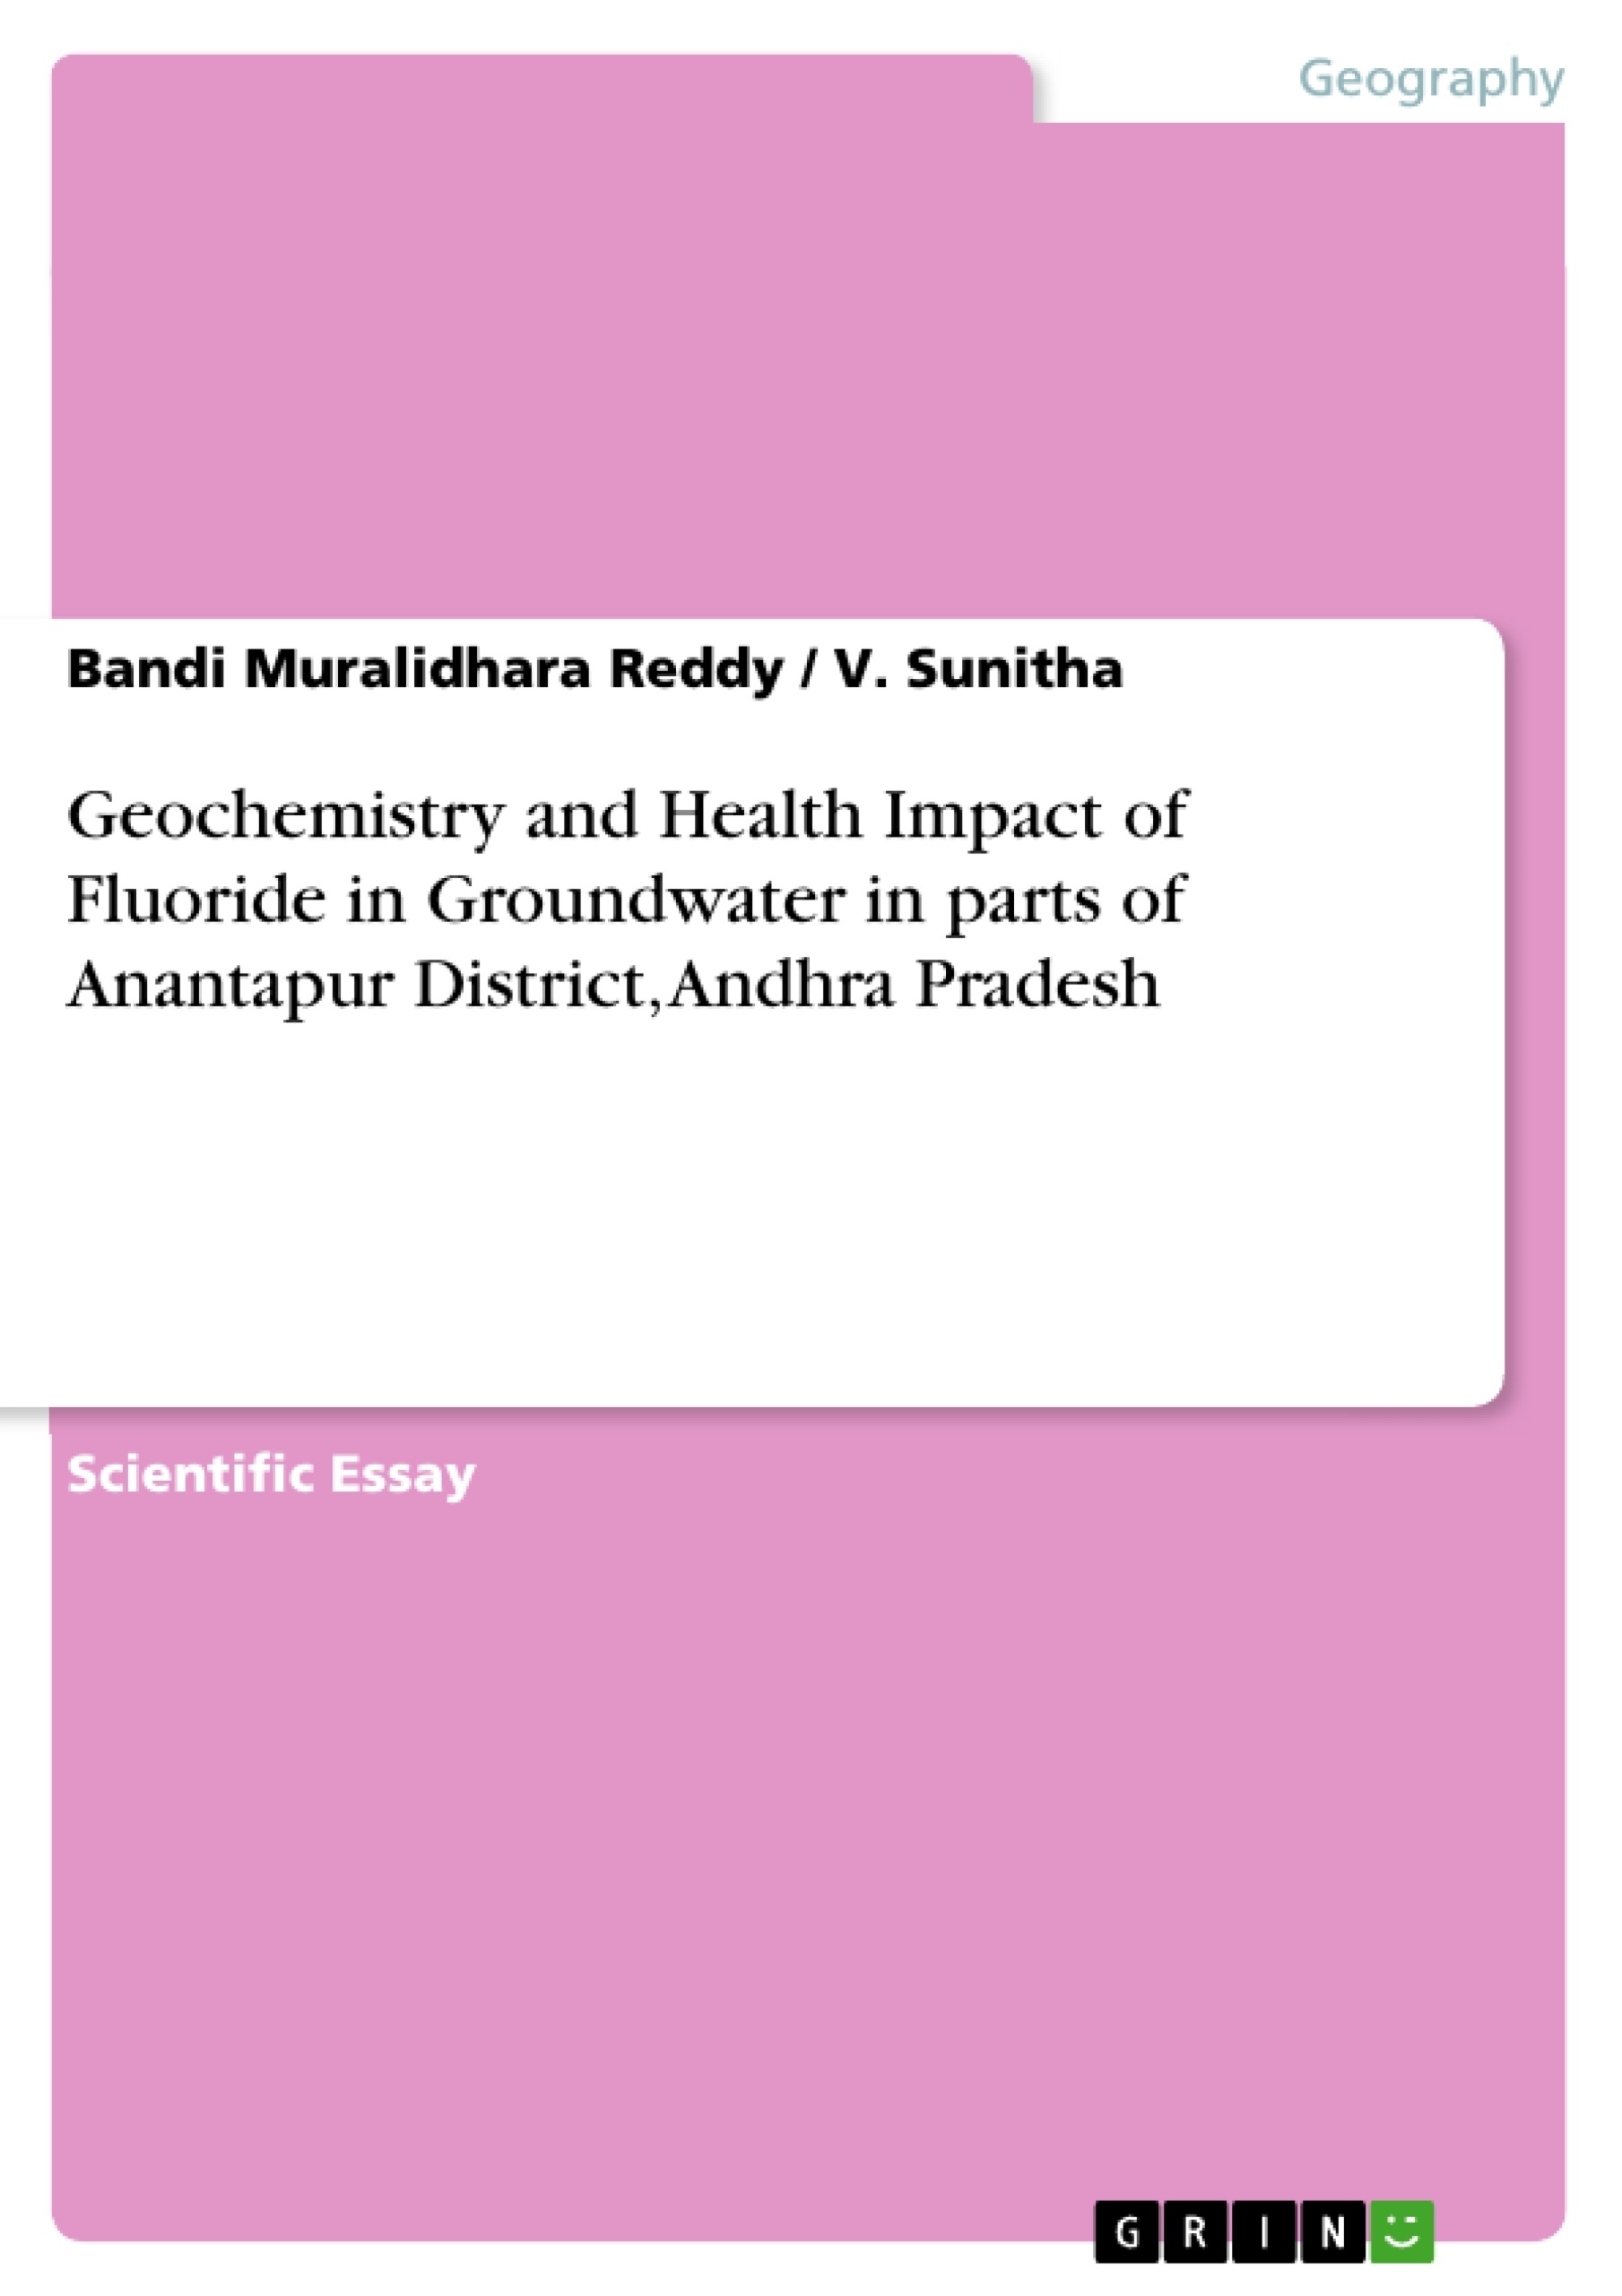 Titre: Geochemistry and Health Impact of Fluoride in Groundwater in parts of Anantapur District, Andhra Pradesh